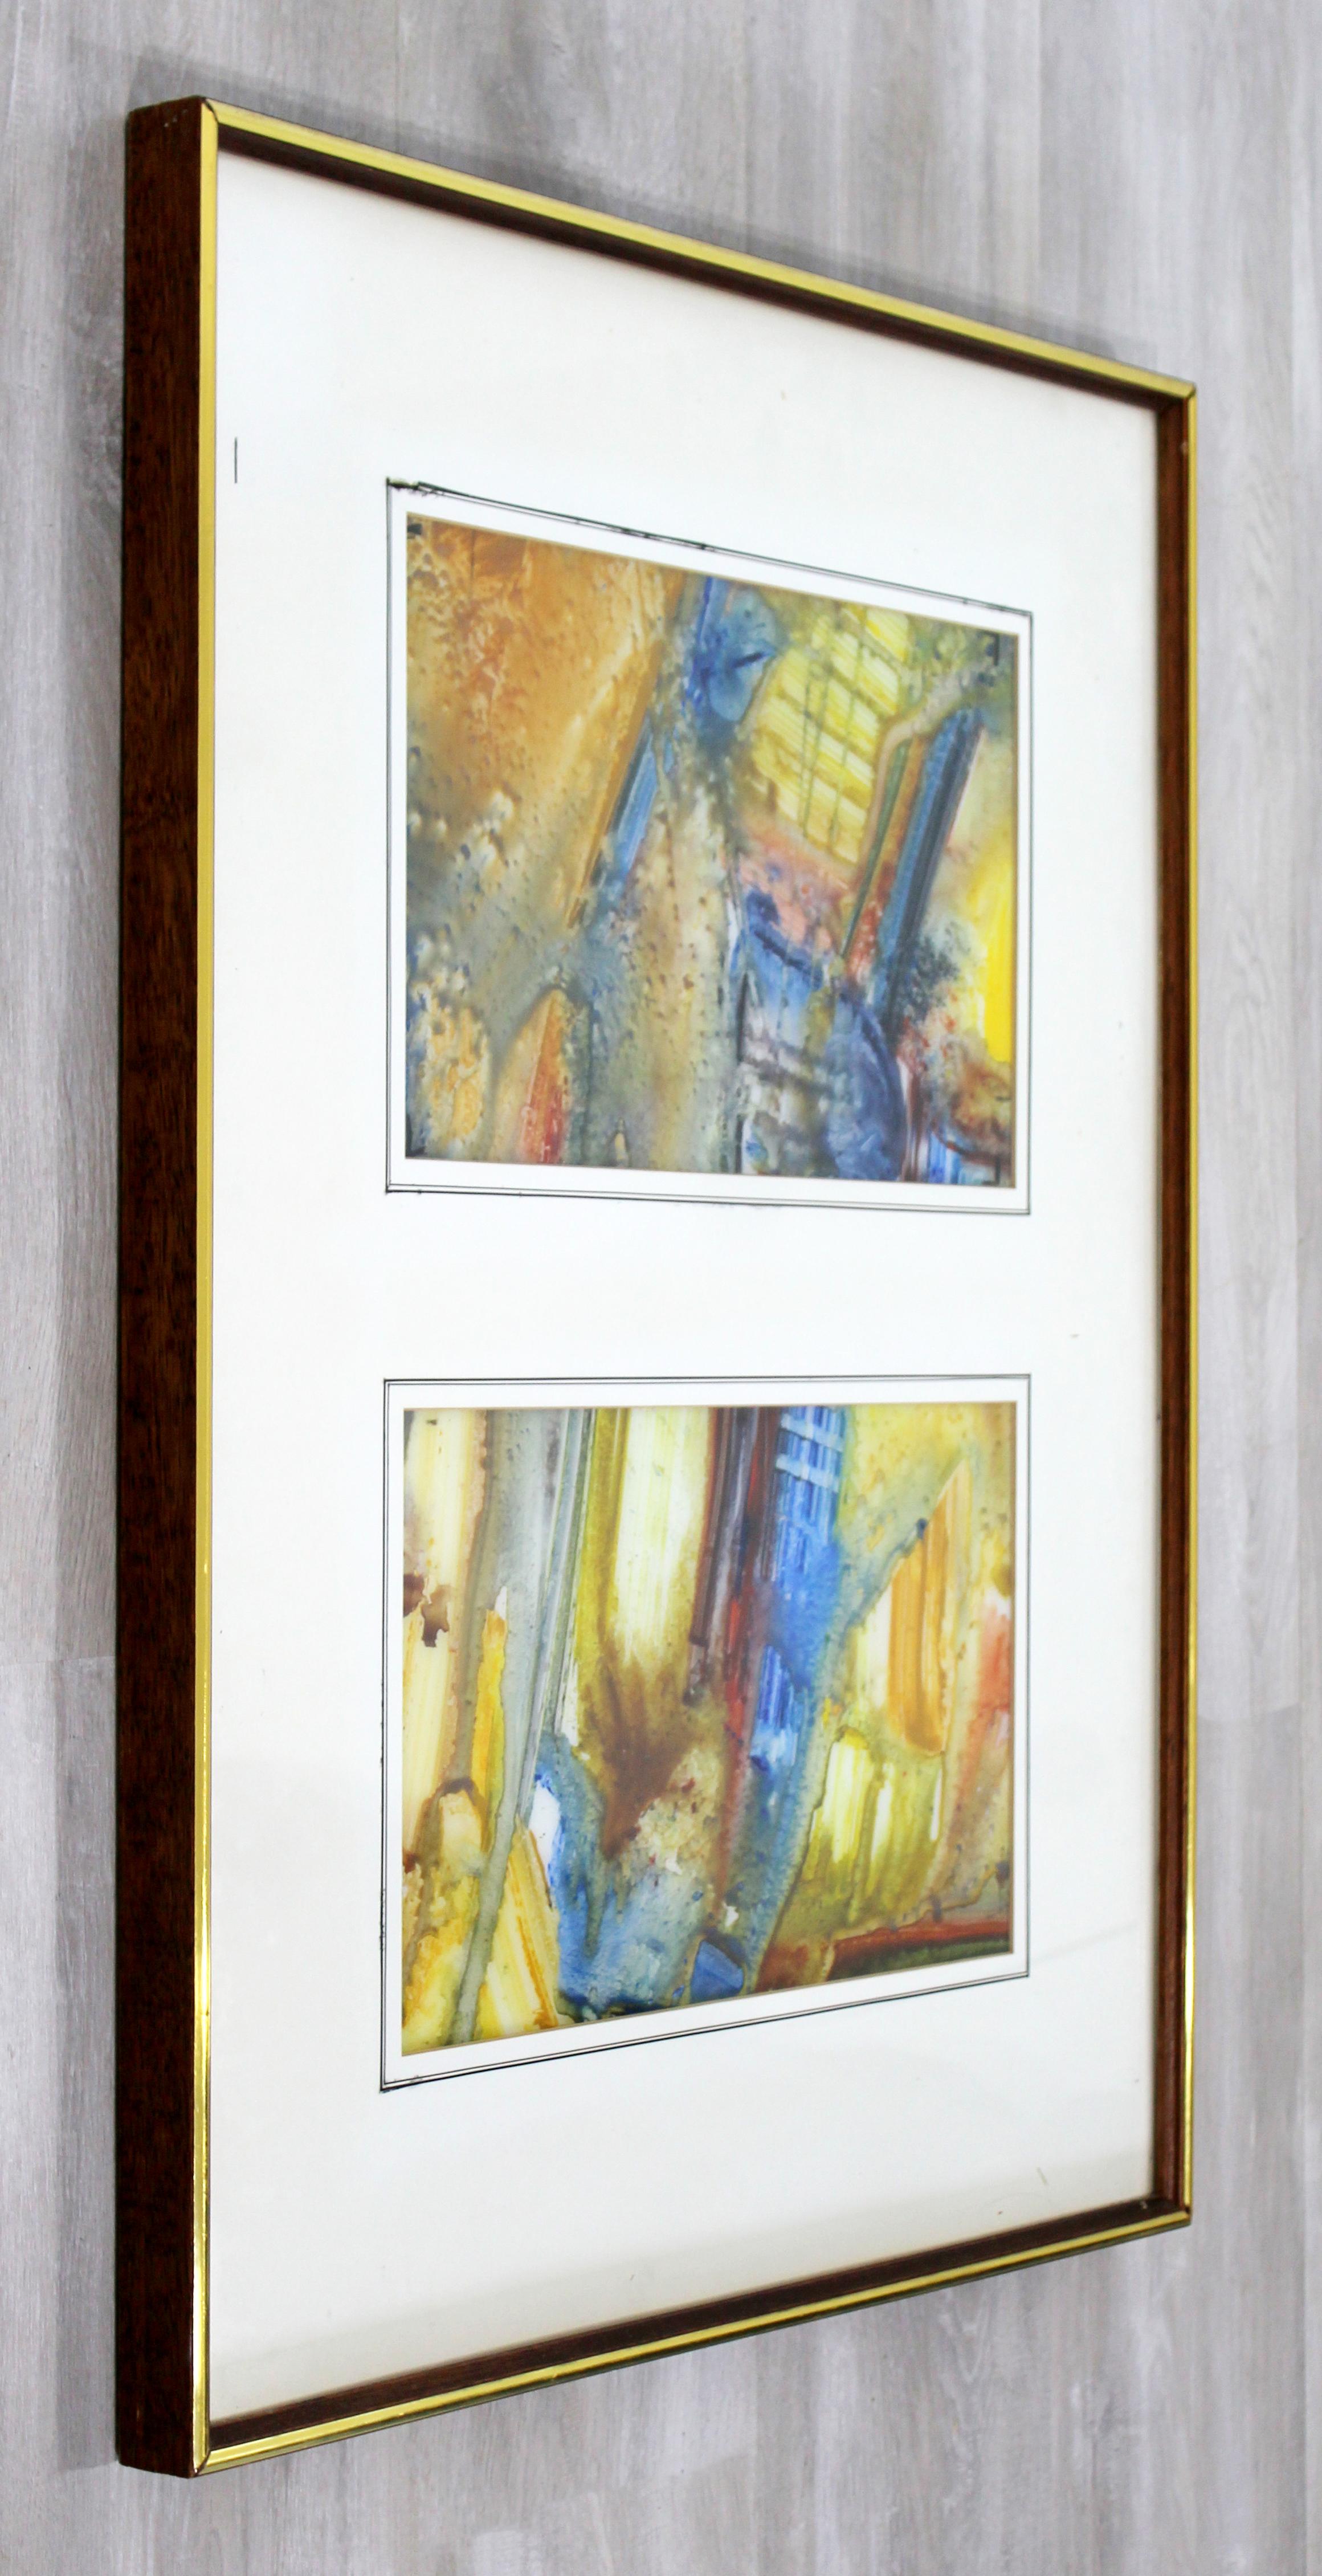 Late 20th Century Mid-Century Modern Framed Abstract Encaustic Mixed-Media Diptych Signed L. Biro